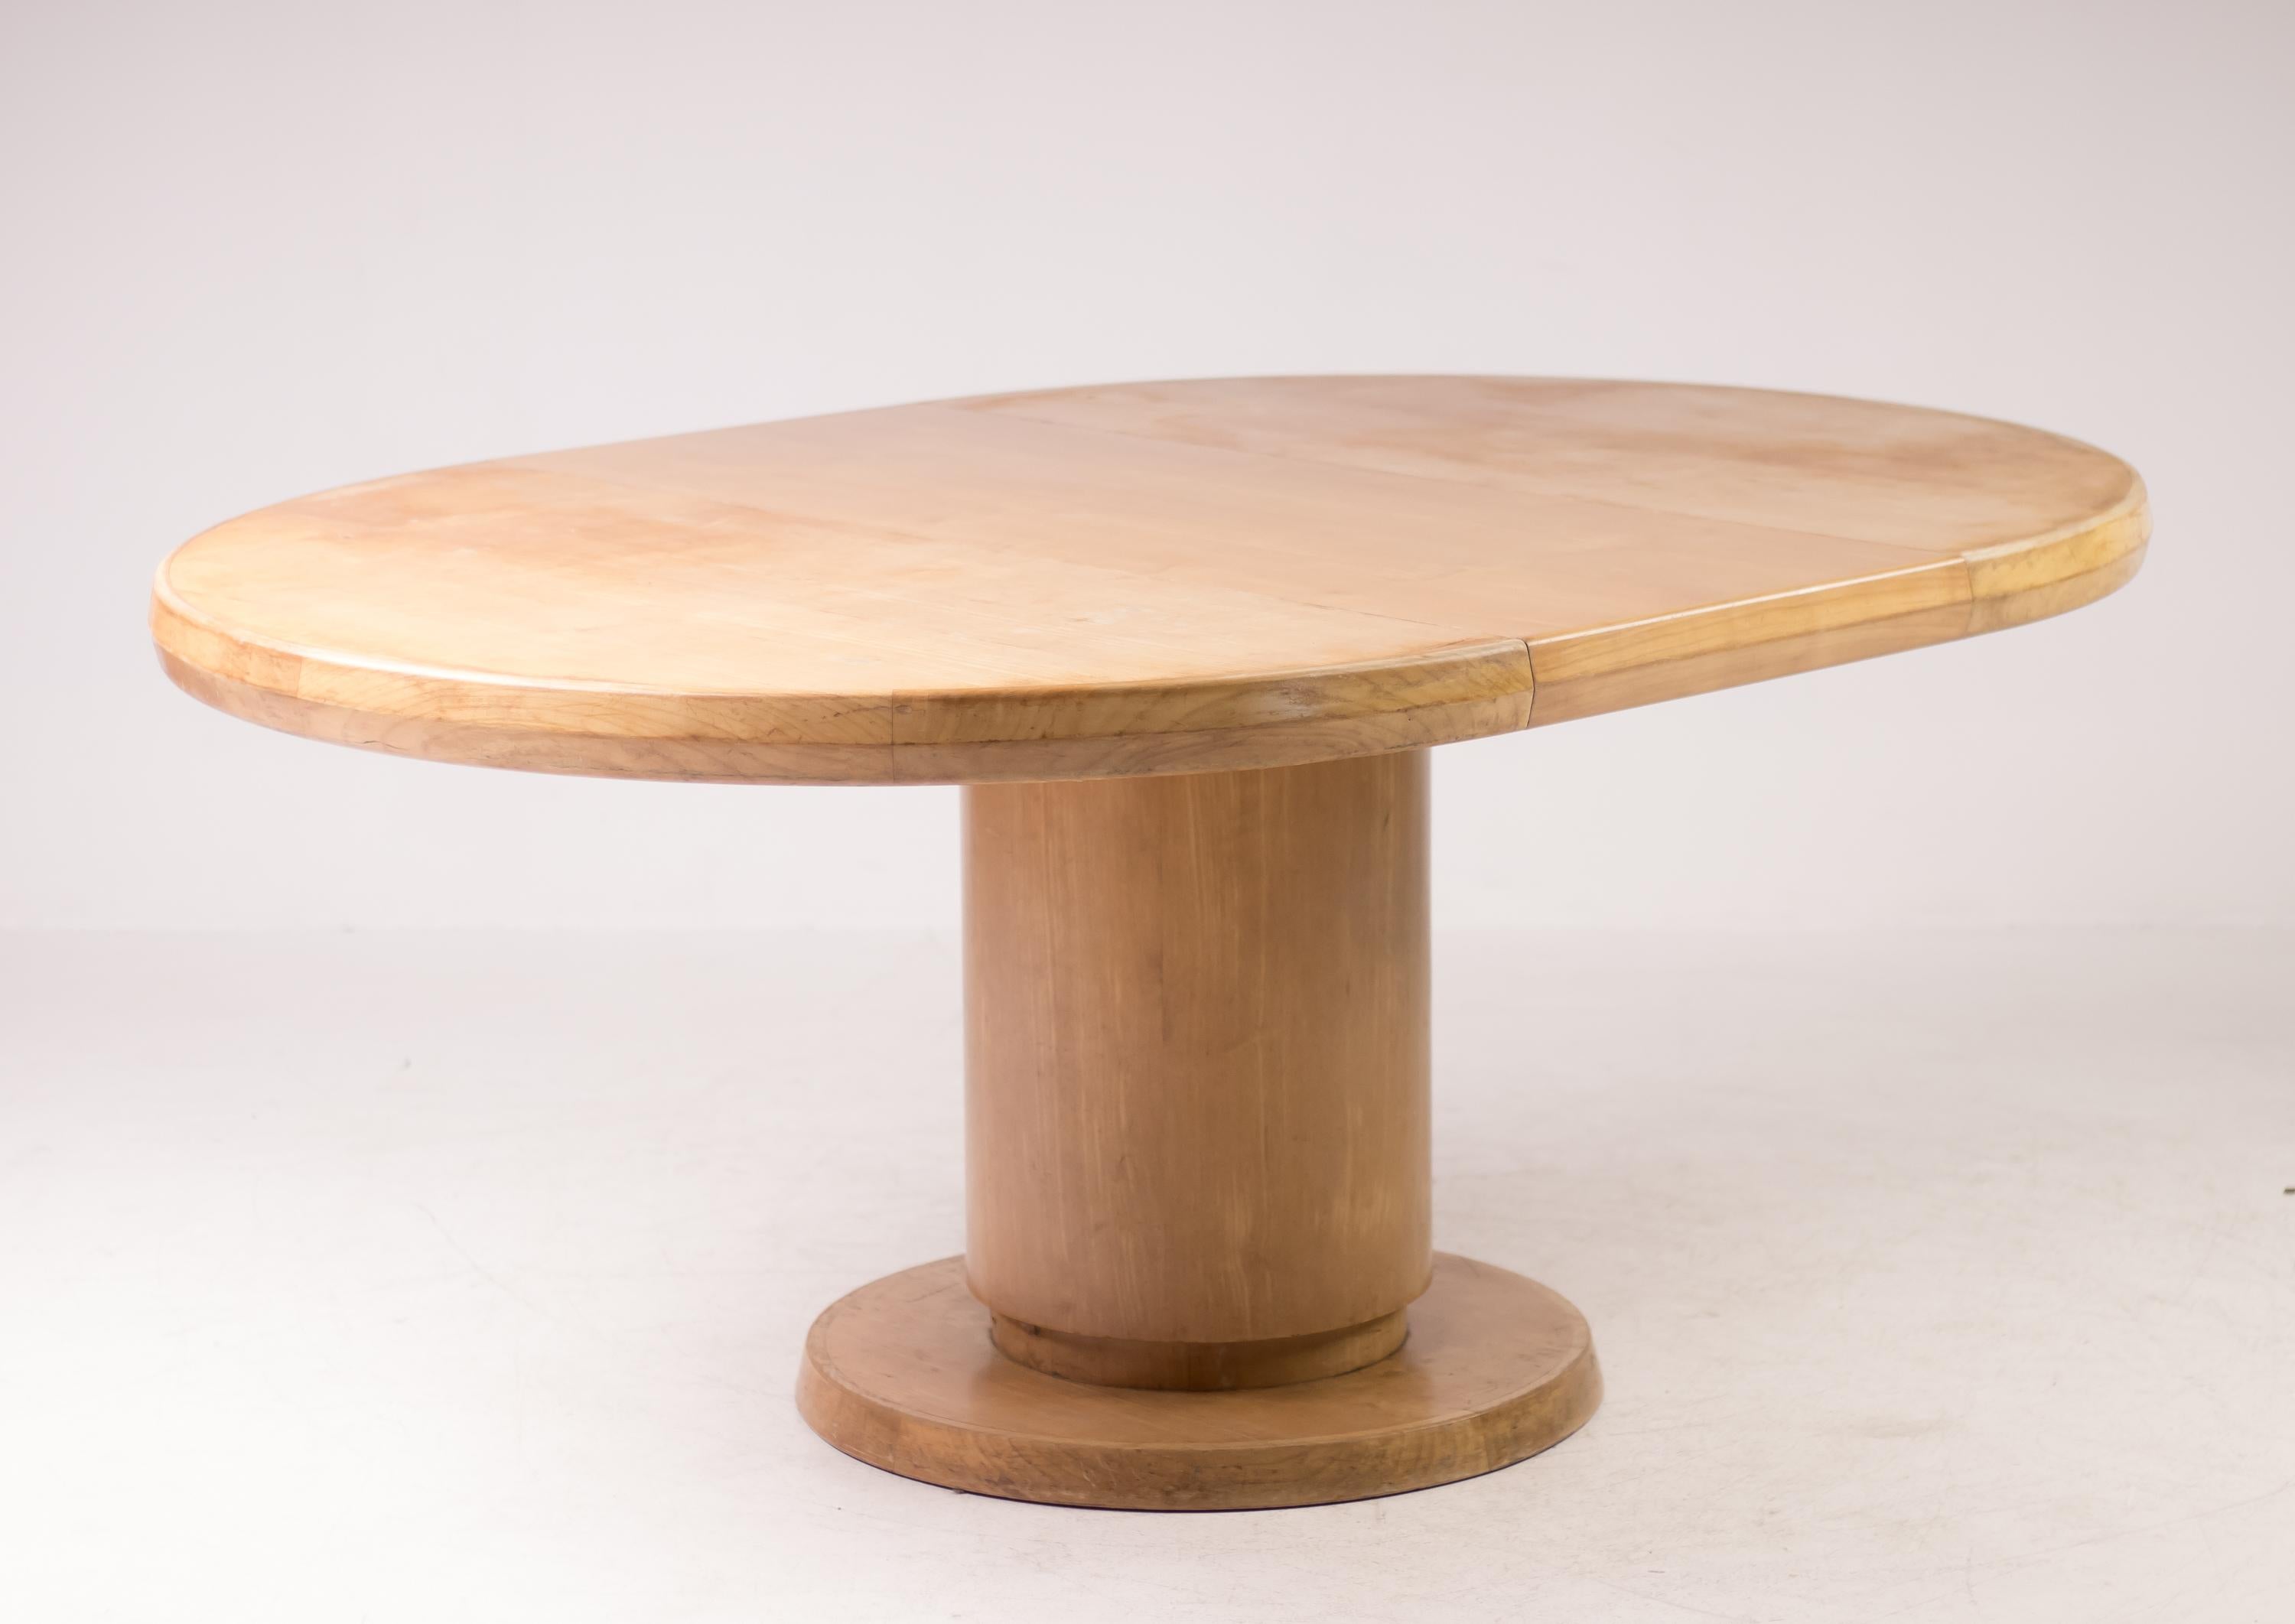 Practical Mid-Century Modern table in birch, designed by a well known Dutch architect.
The table has a very sophisticated extending mechanism that works flawlessly.
It extends with 2 extra 50 cm tops to a large and stabile oval table of 230 x 130